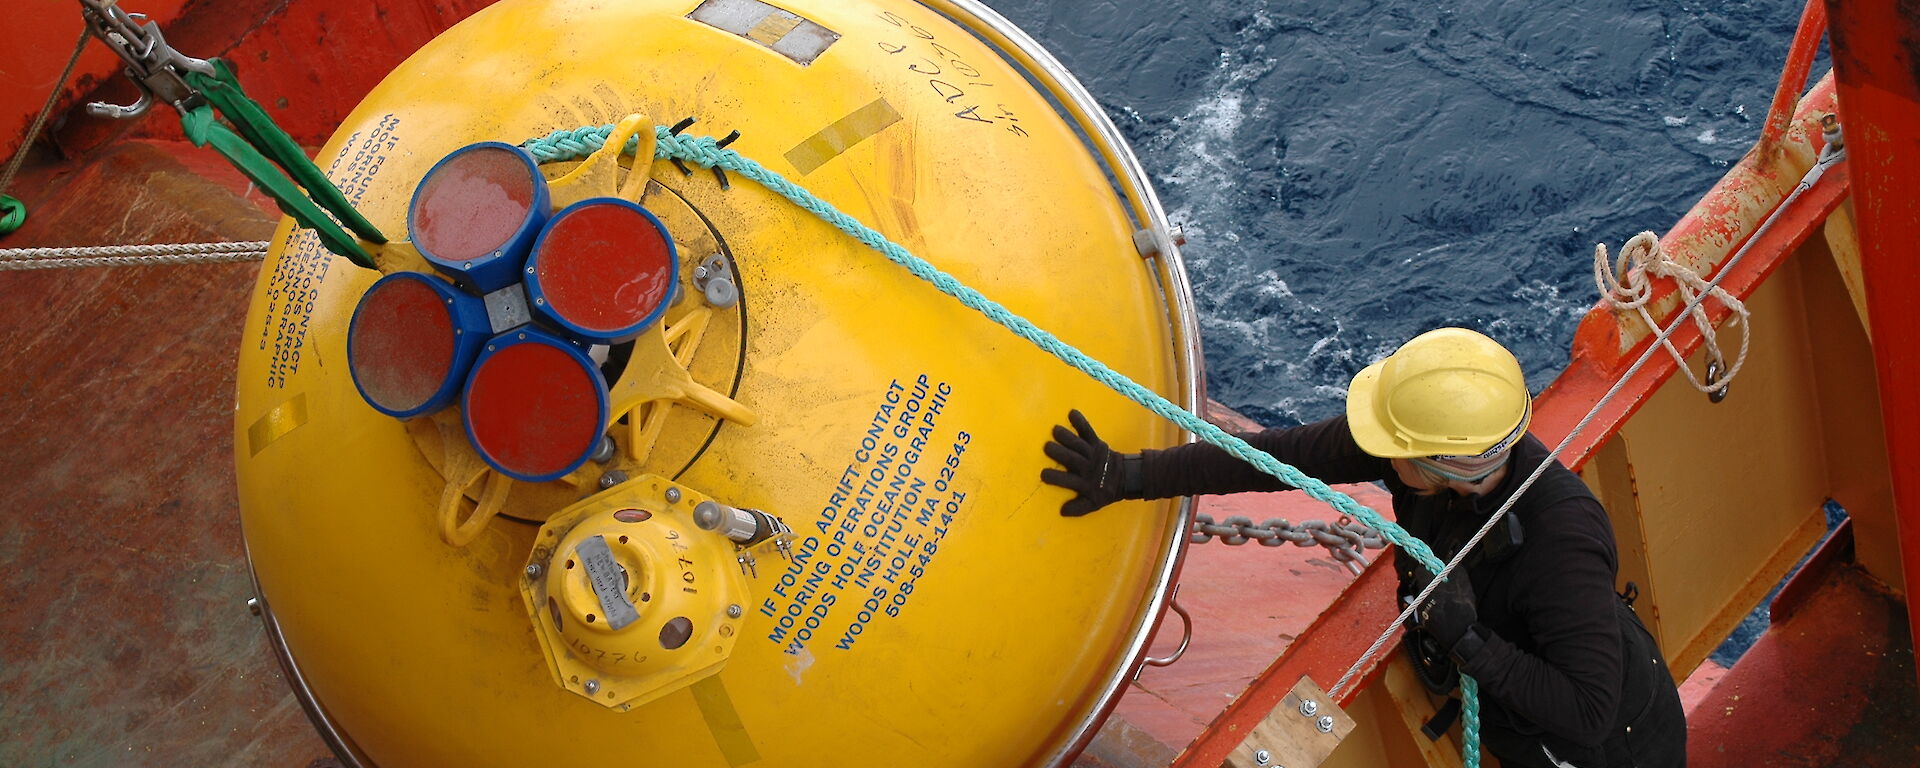 A giant yellow buoy is deployed from the ship’s trawl deck